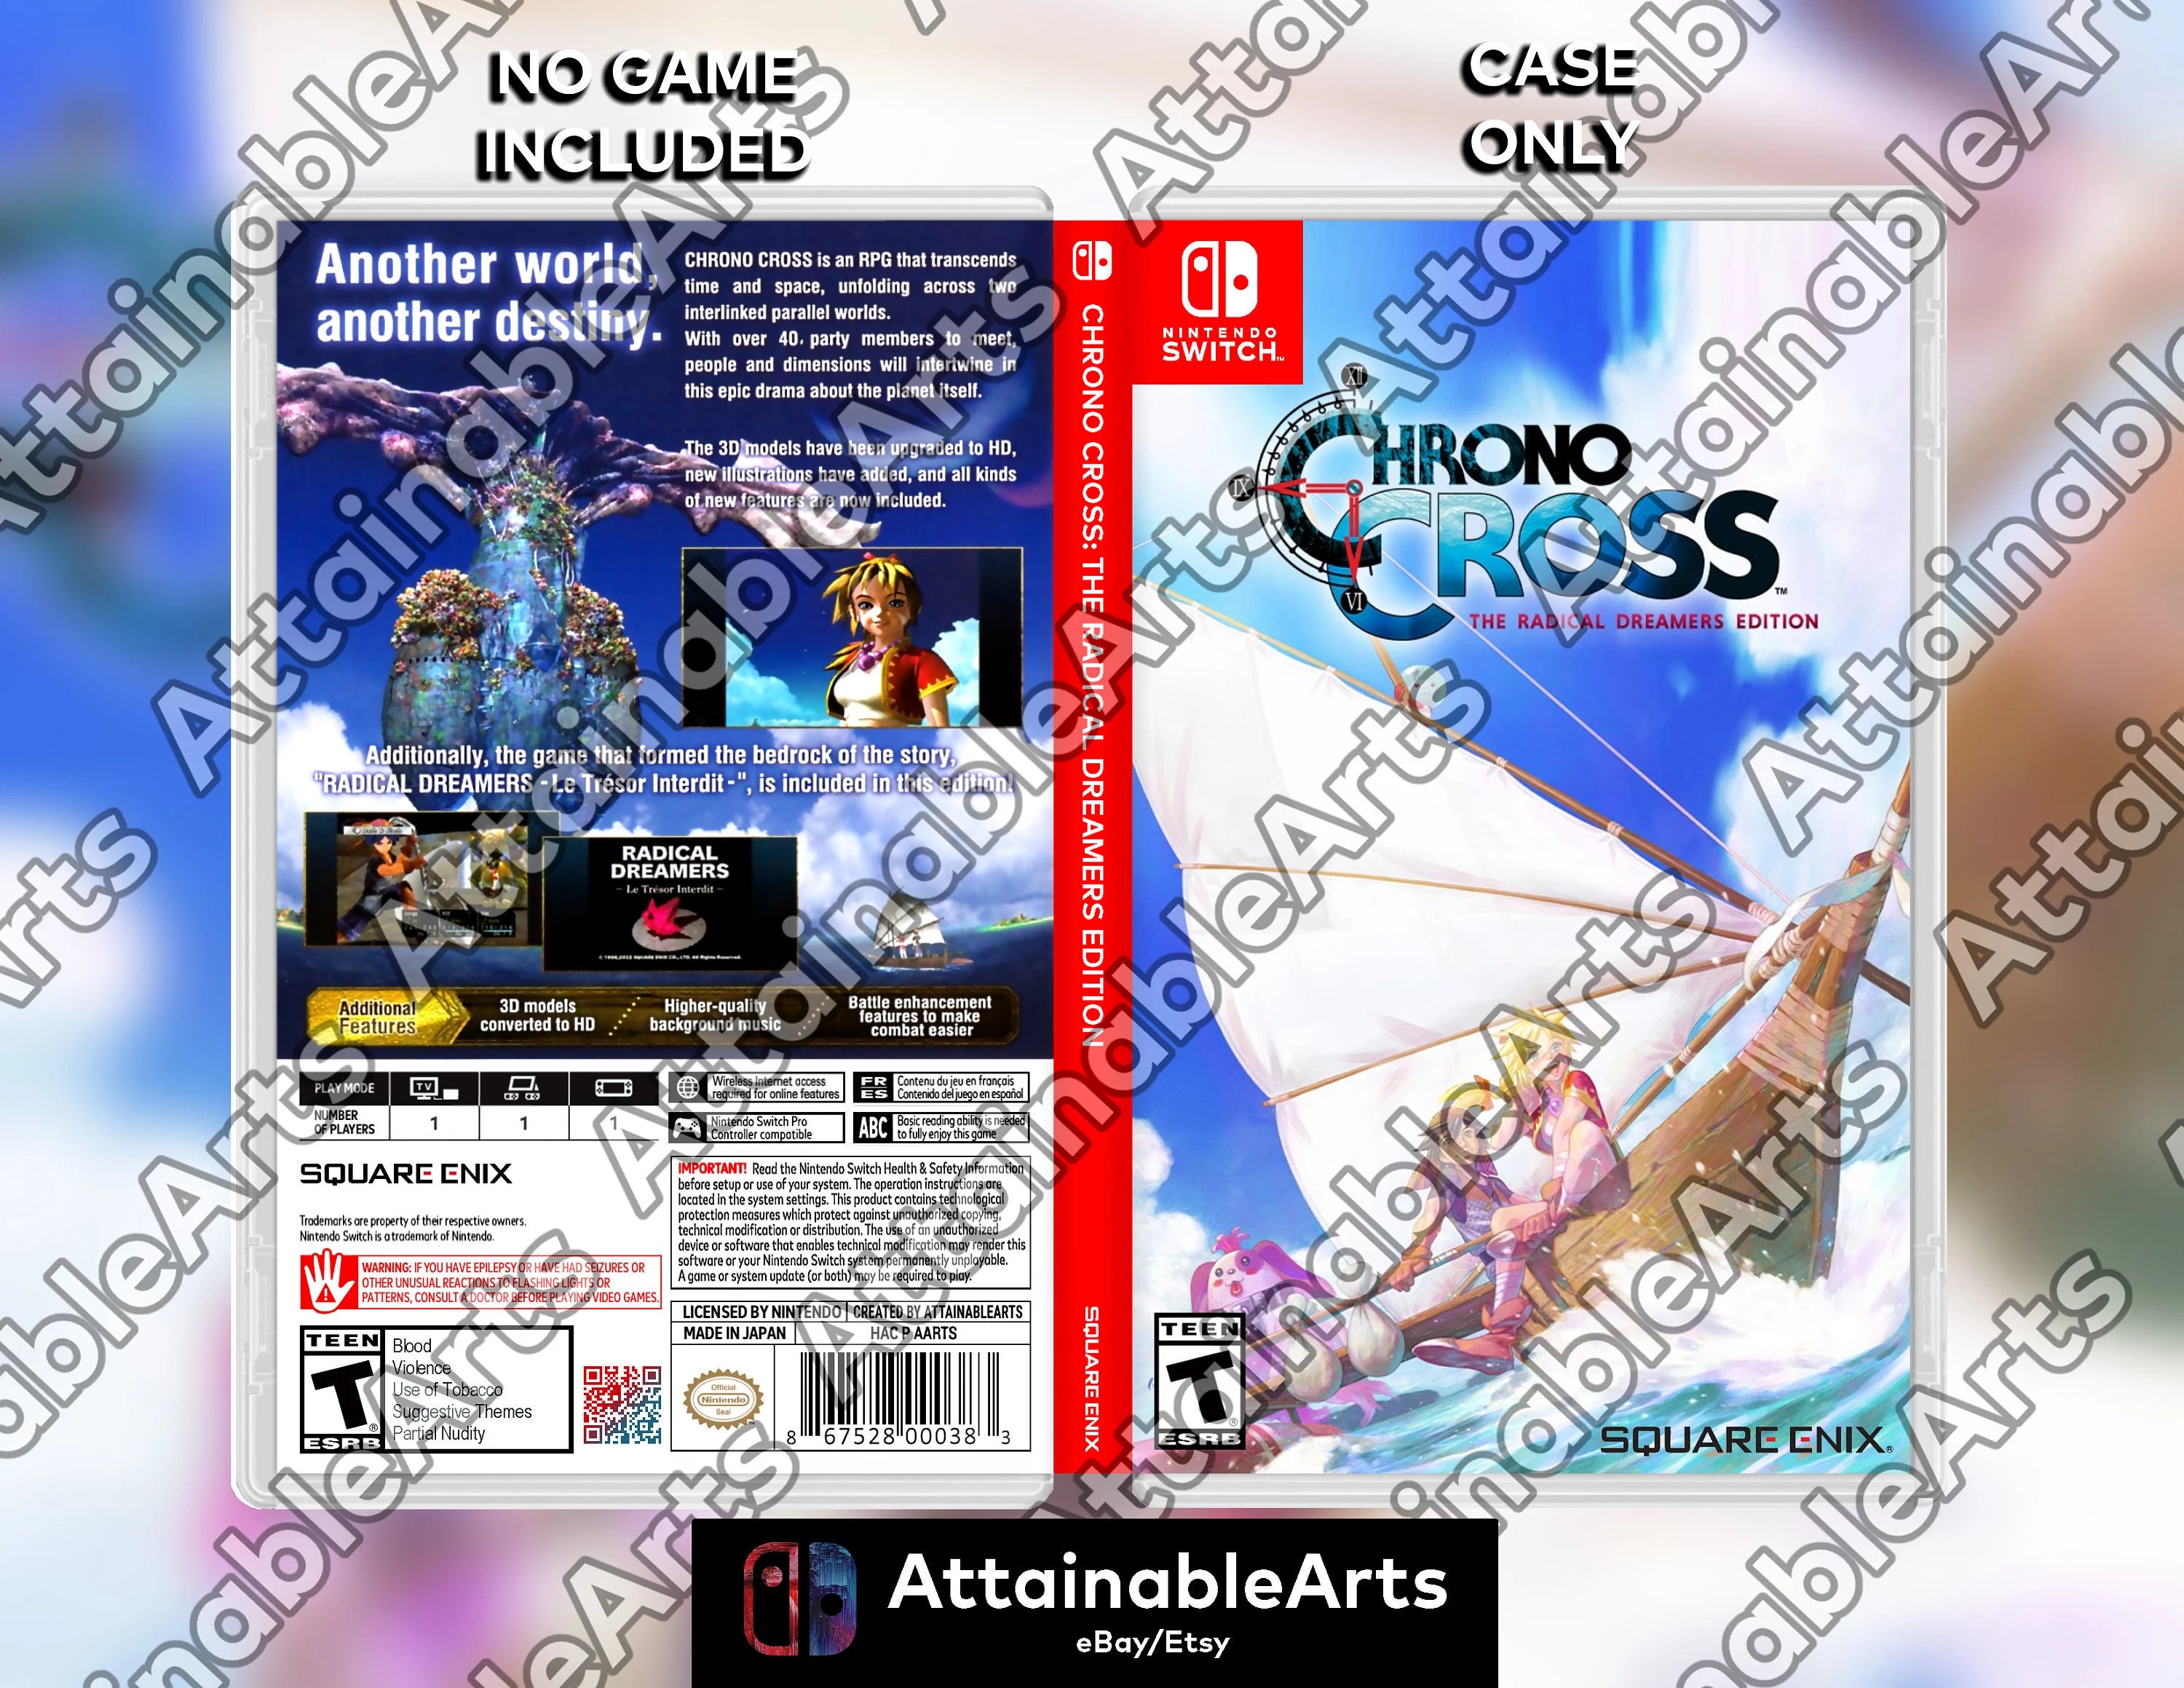 CHRONO CROSS: THE RADICAL DREAMERS EDITION Nintendo Switch Physical Copy  New